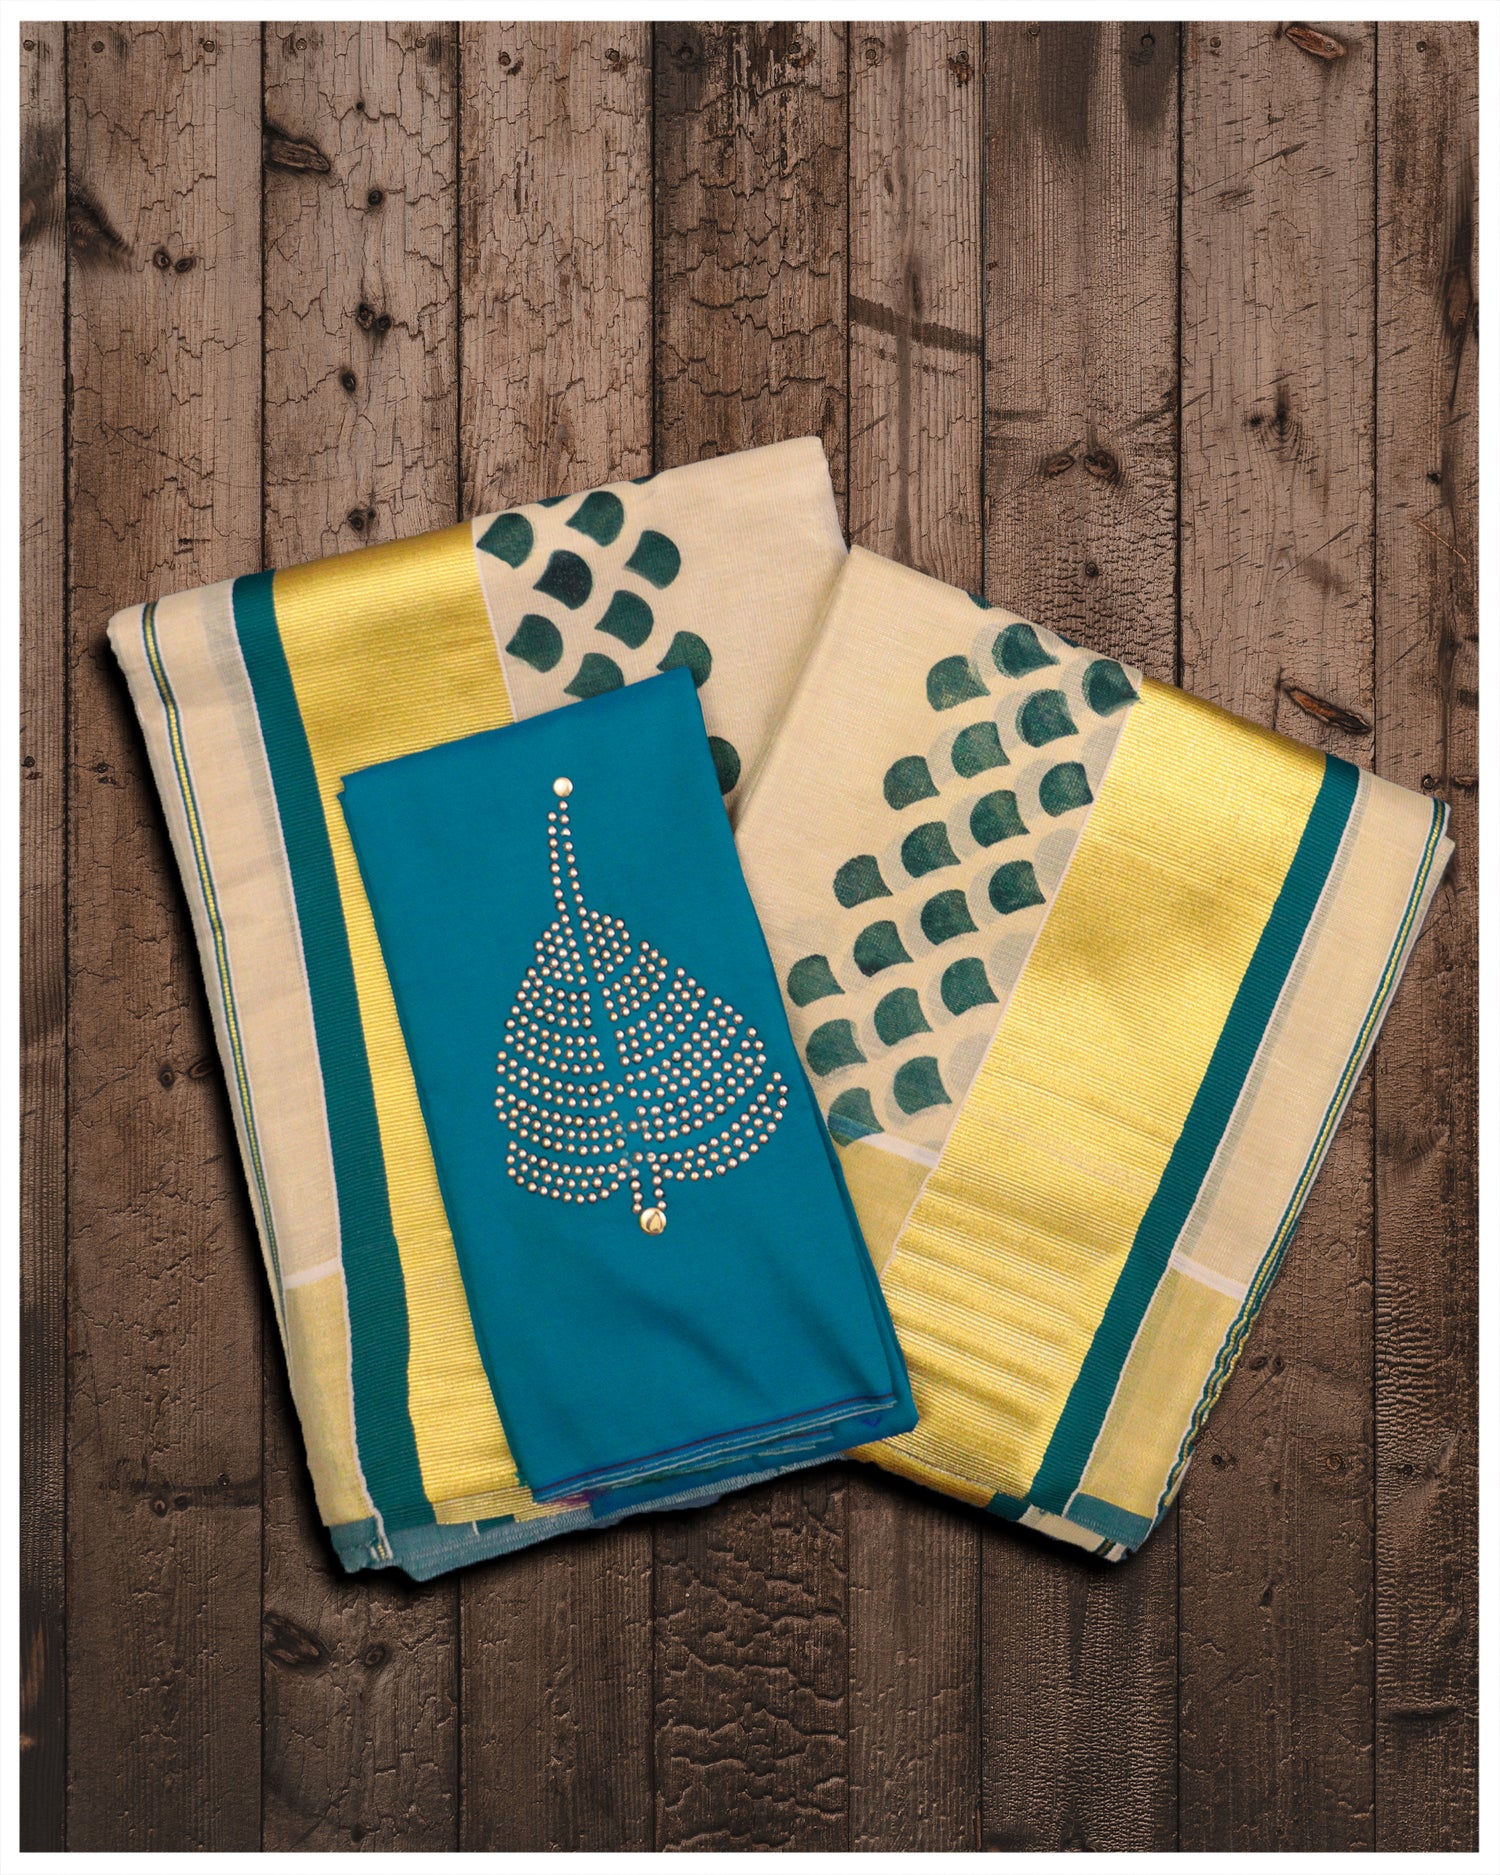 This elegant Golden Tissue Set Mundu in a stunning Gold Kara and Blue Floral Print is the perfect choice for any special occasion. This luxurious set is sure to leave a lasting impression with its intricate details and vibrant colors.